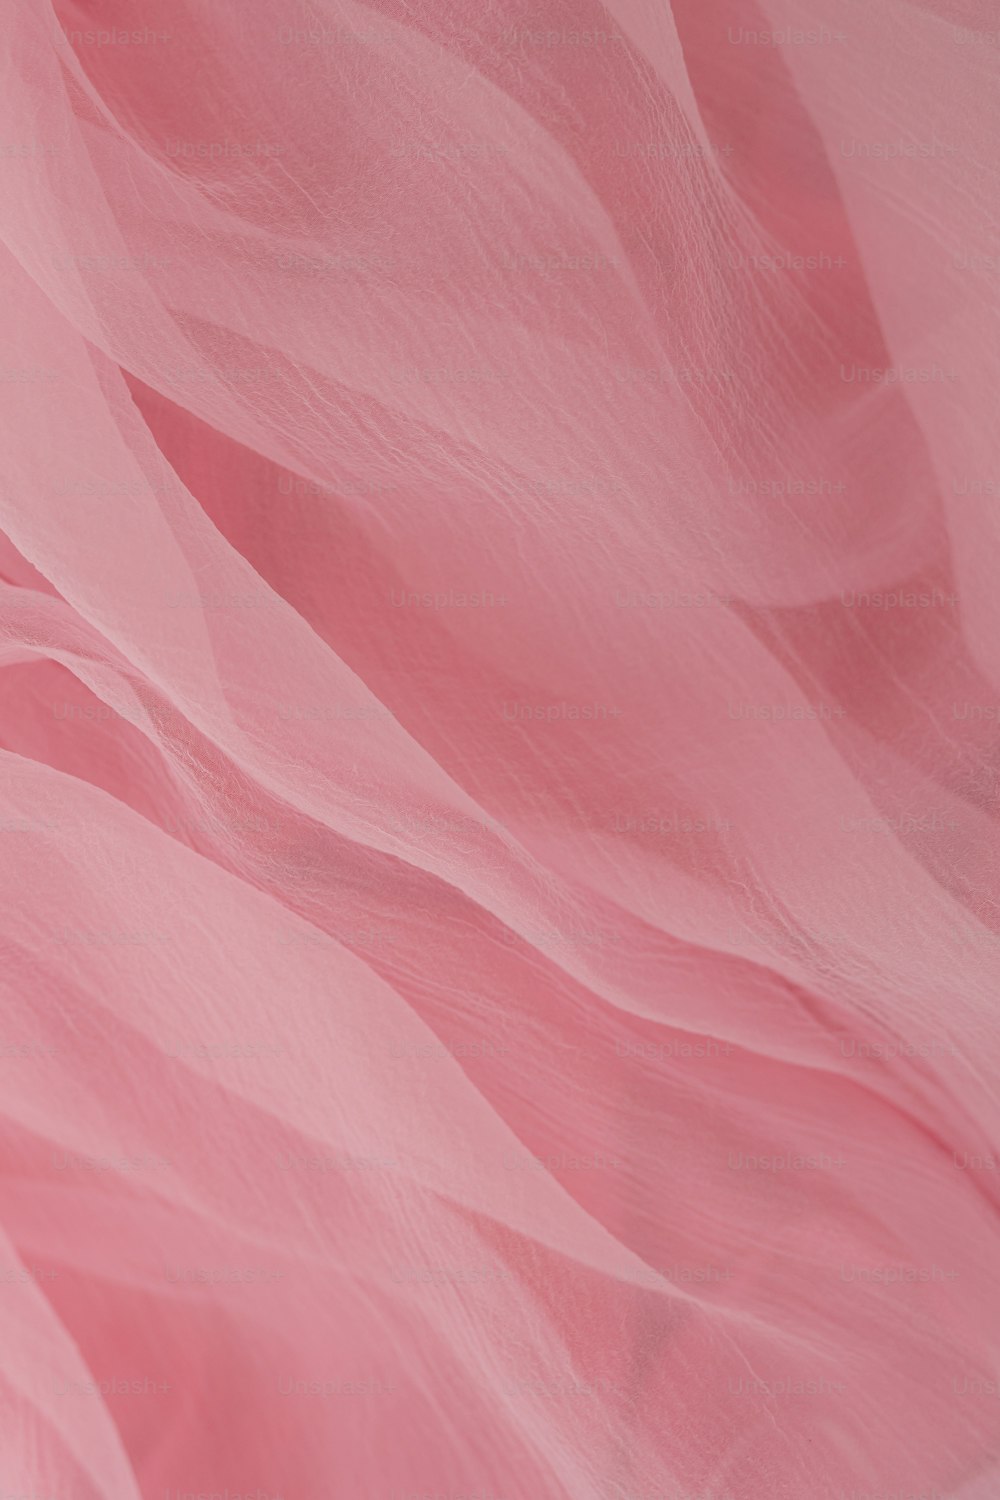 Pink Fabric Texture Images – Browse 1,192,094 Stock Photos